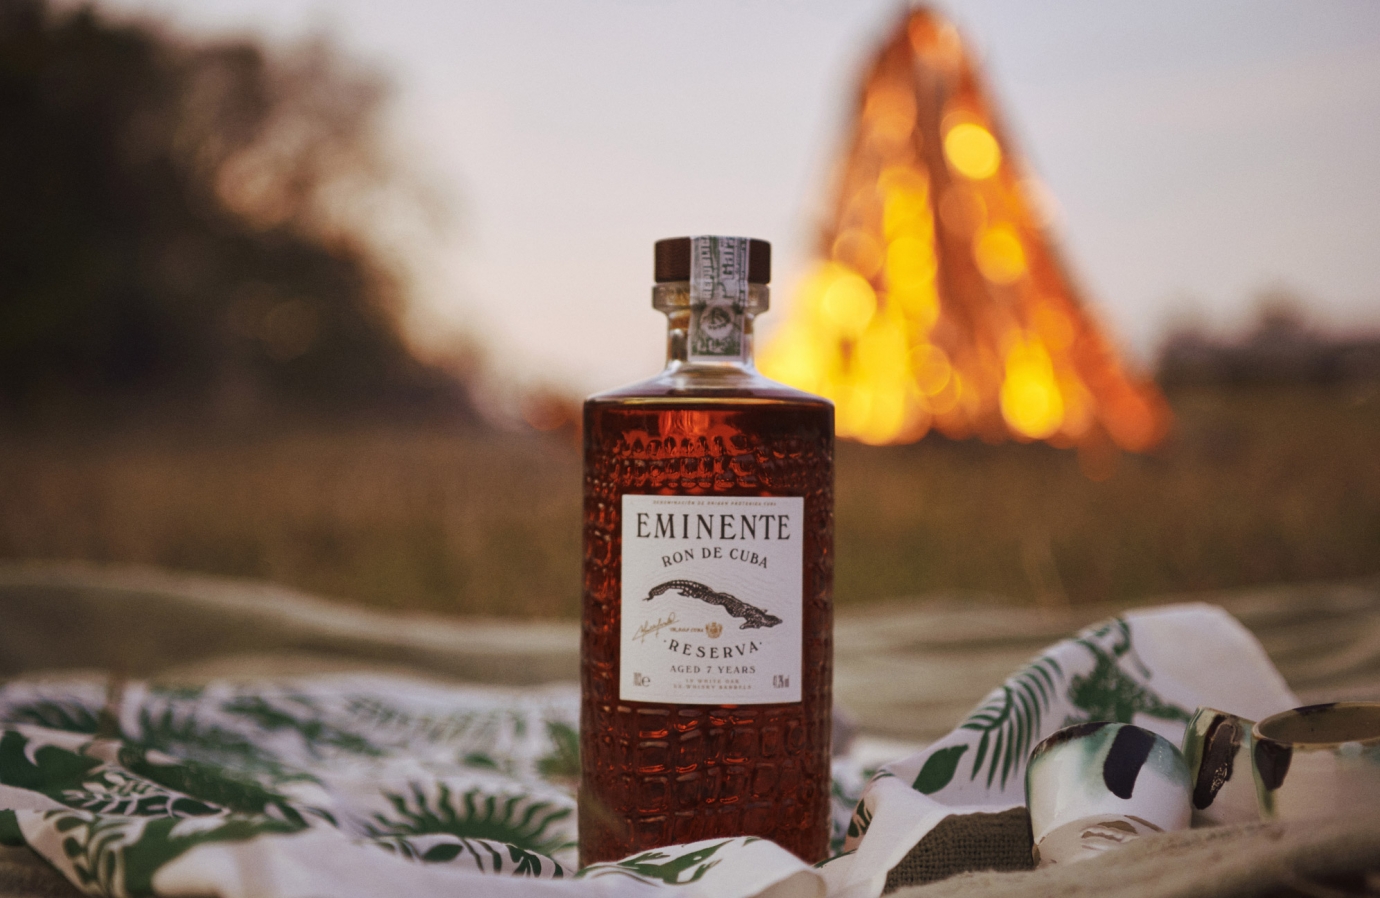 Eminente Reserva Is Inspired By Native Cuban Land That Locals Call